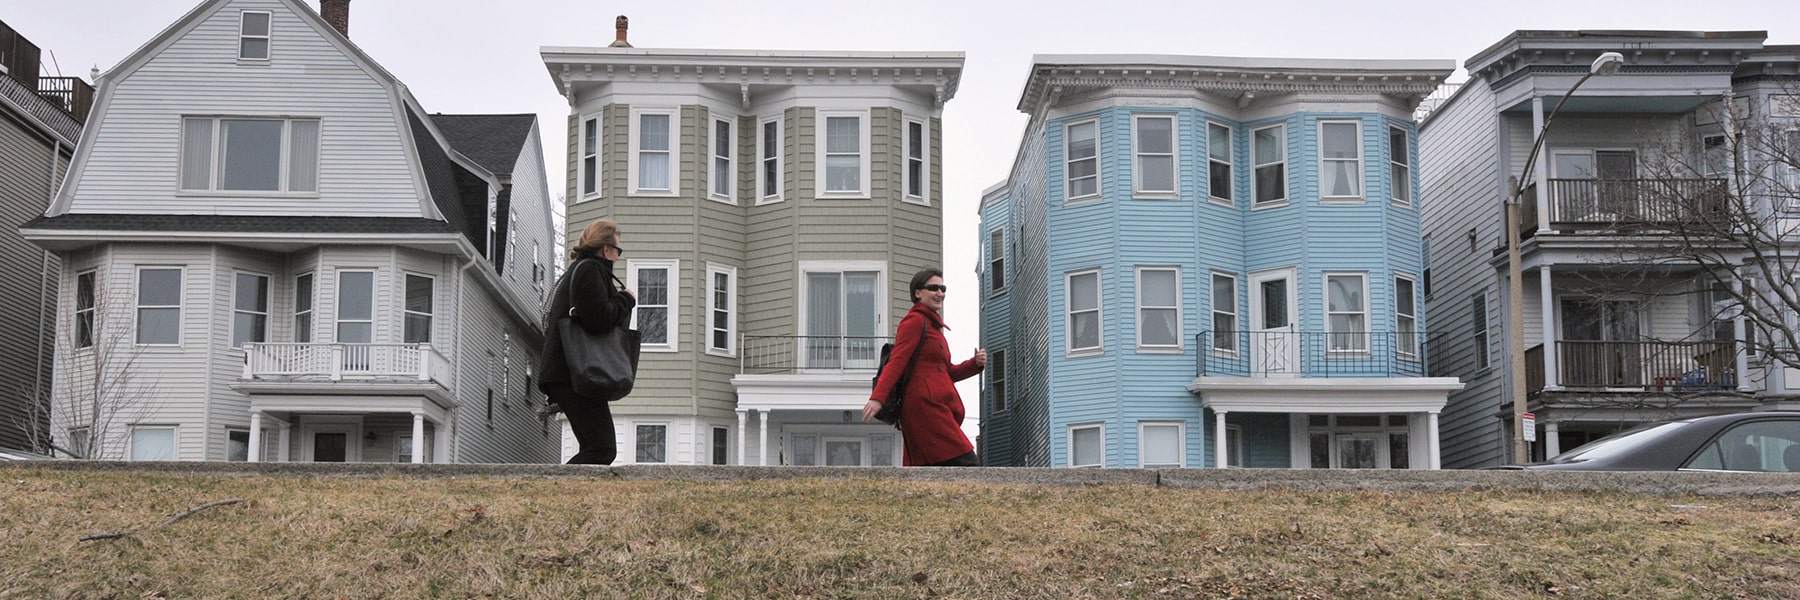 Two people walk past triple decker houses in Dorchester.